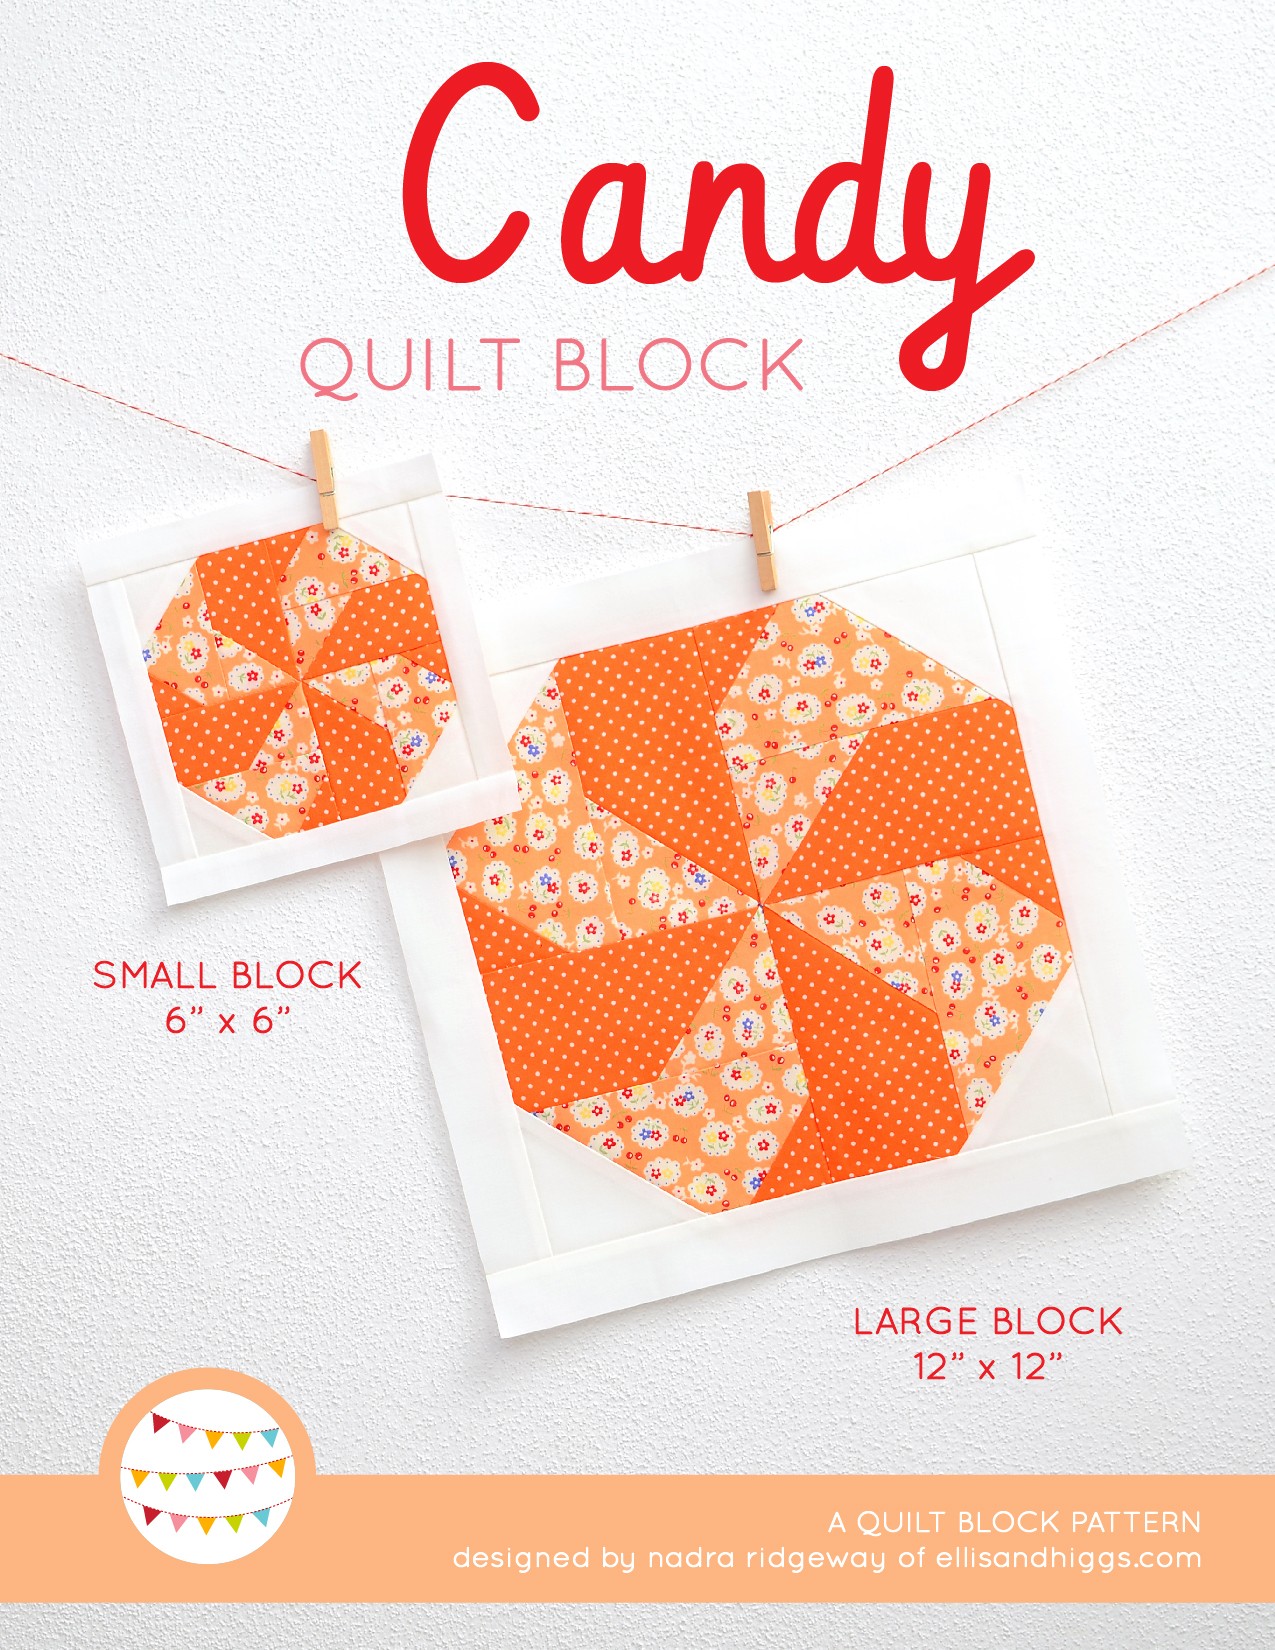 Candy quilt block in two sizes hanging on a wall